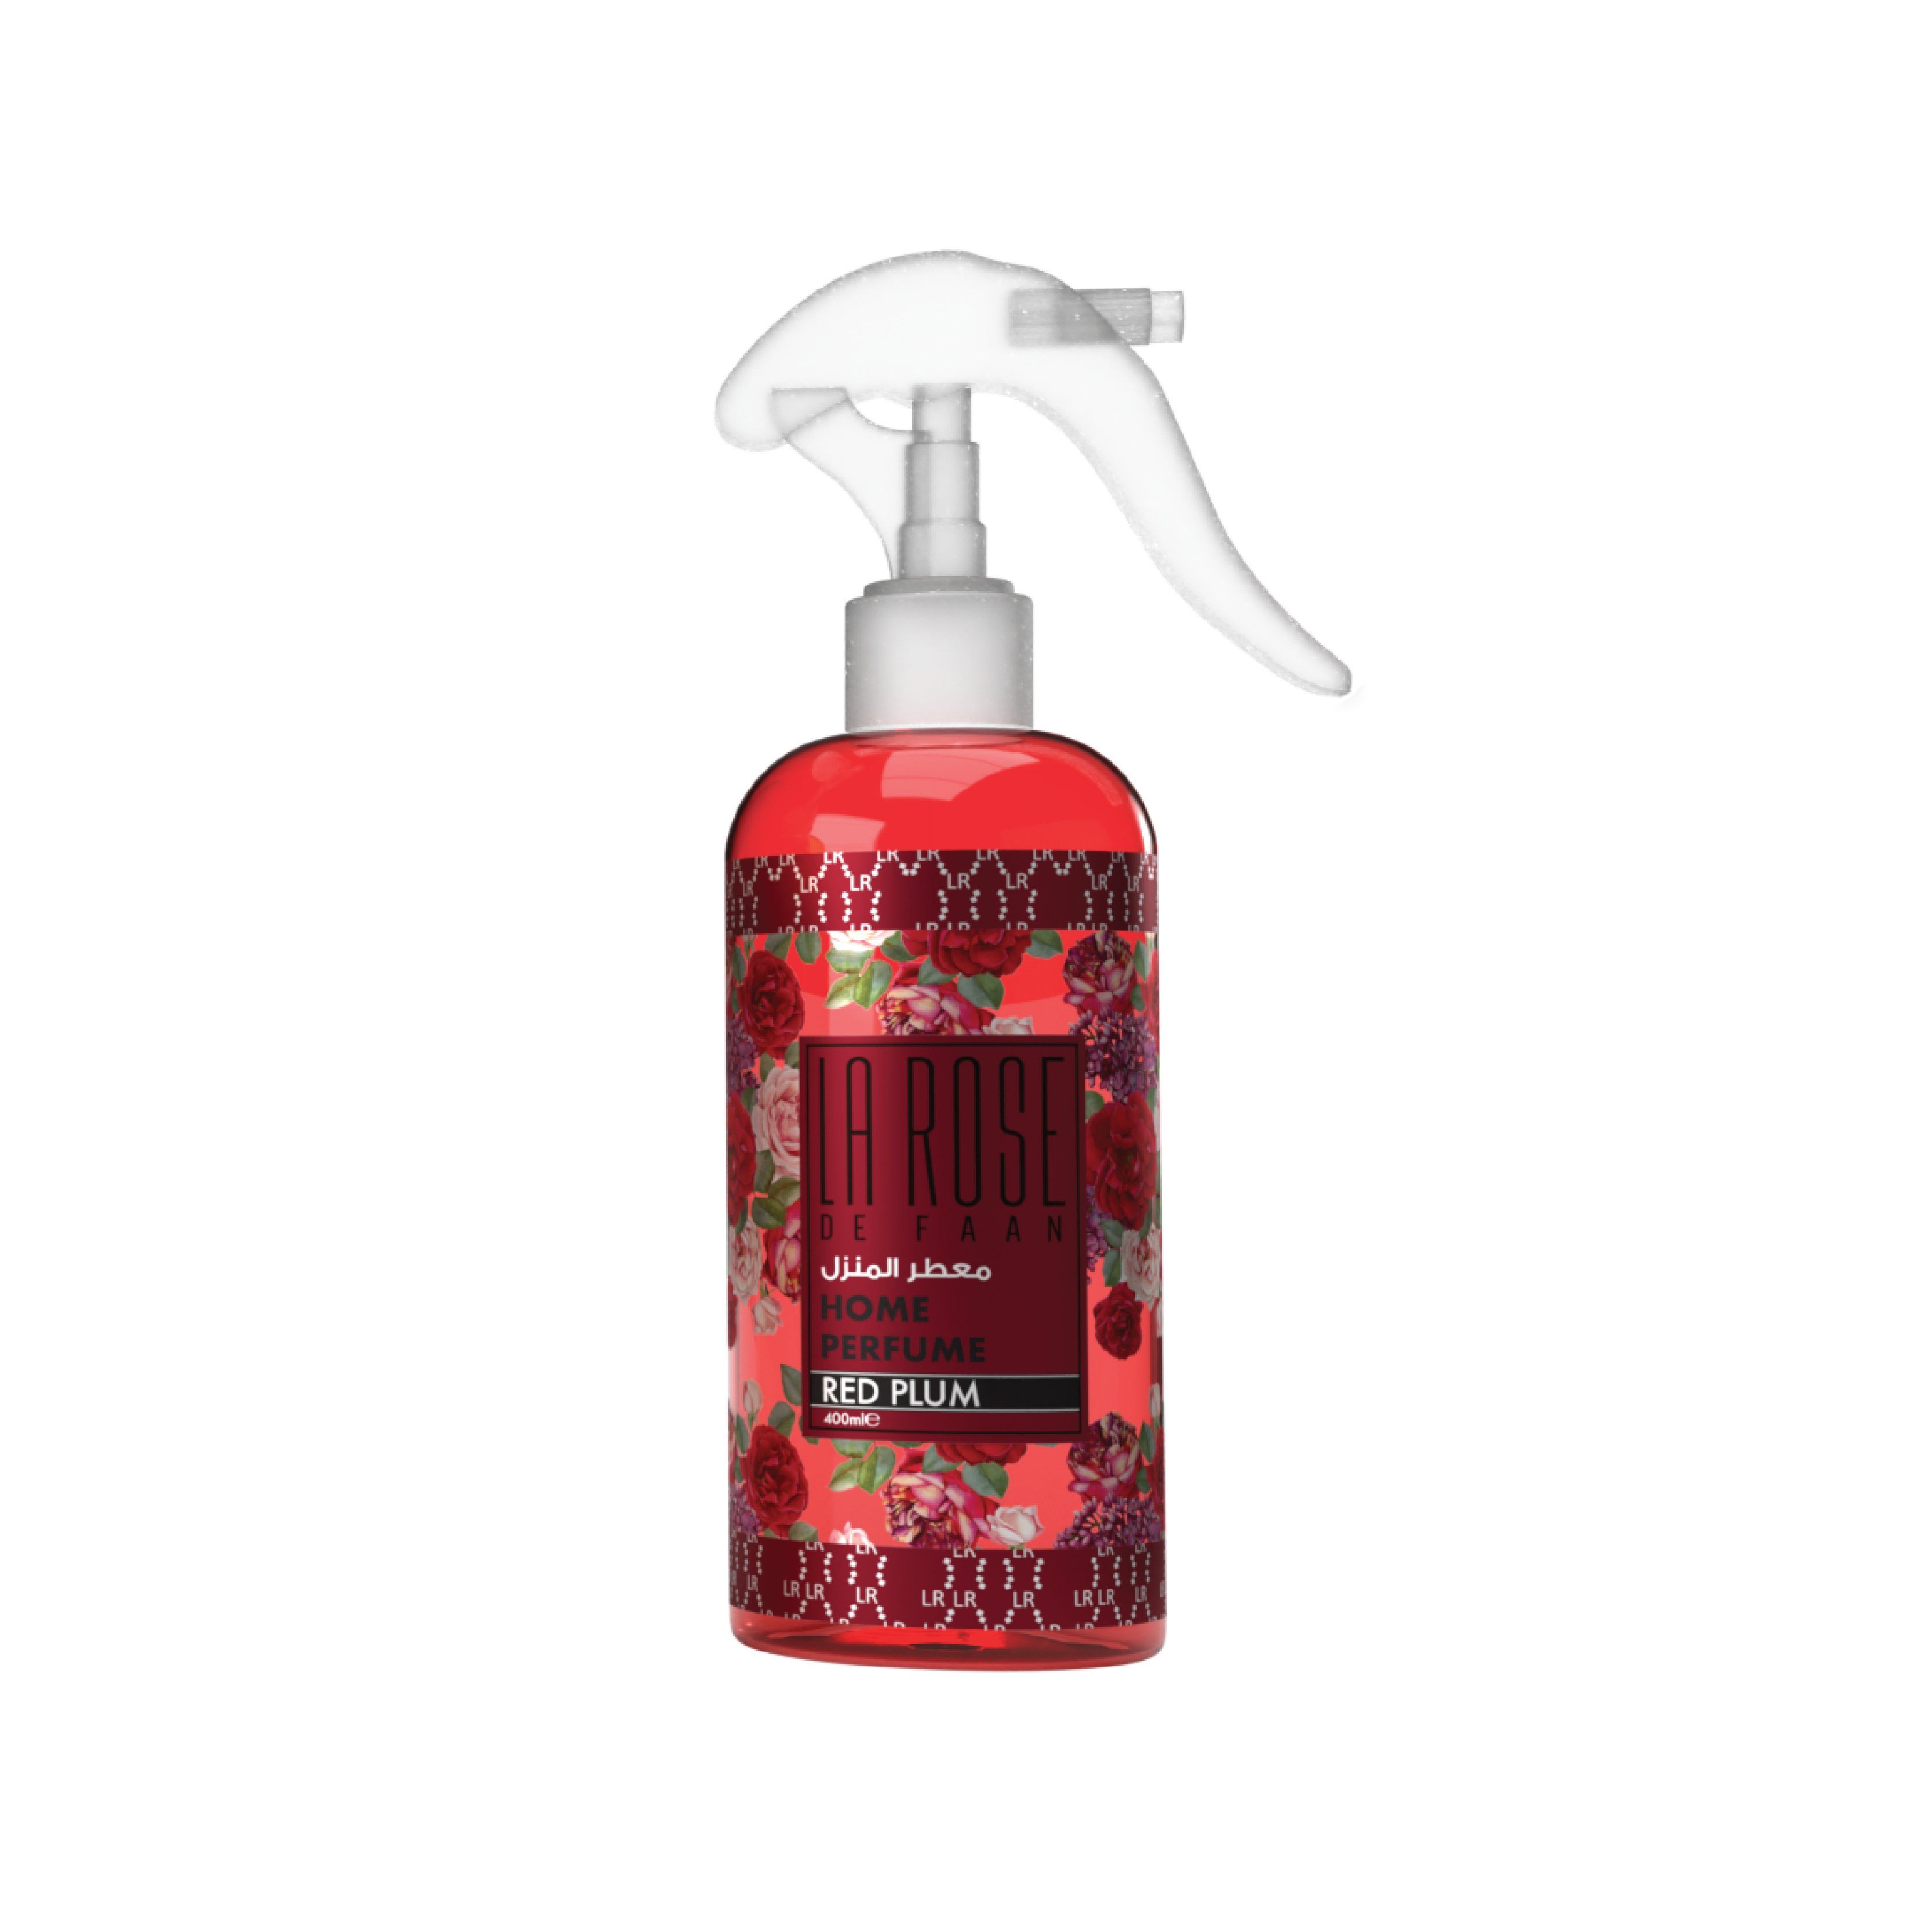 Surround Yourself with Comfort with La Rose Red Plum Home Perfume